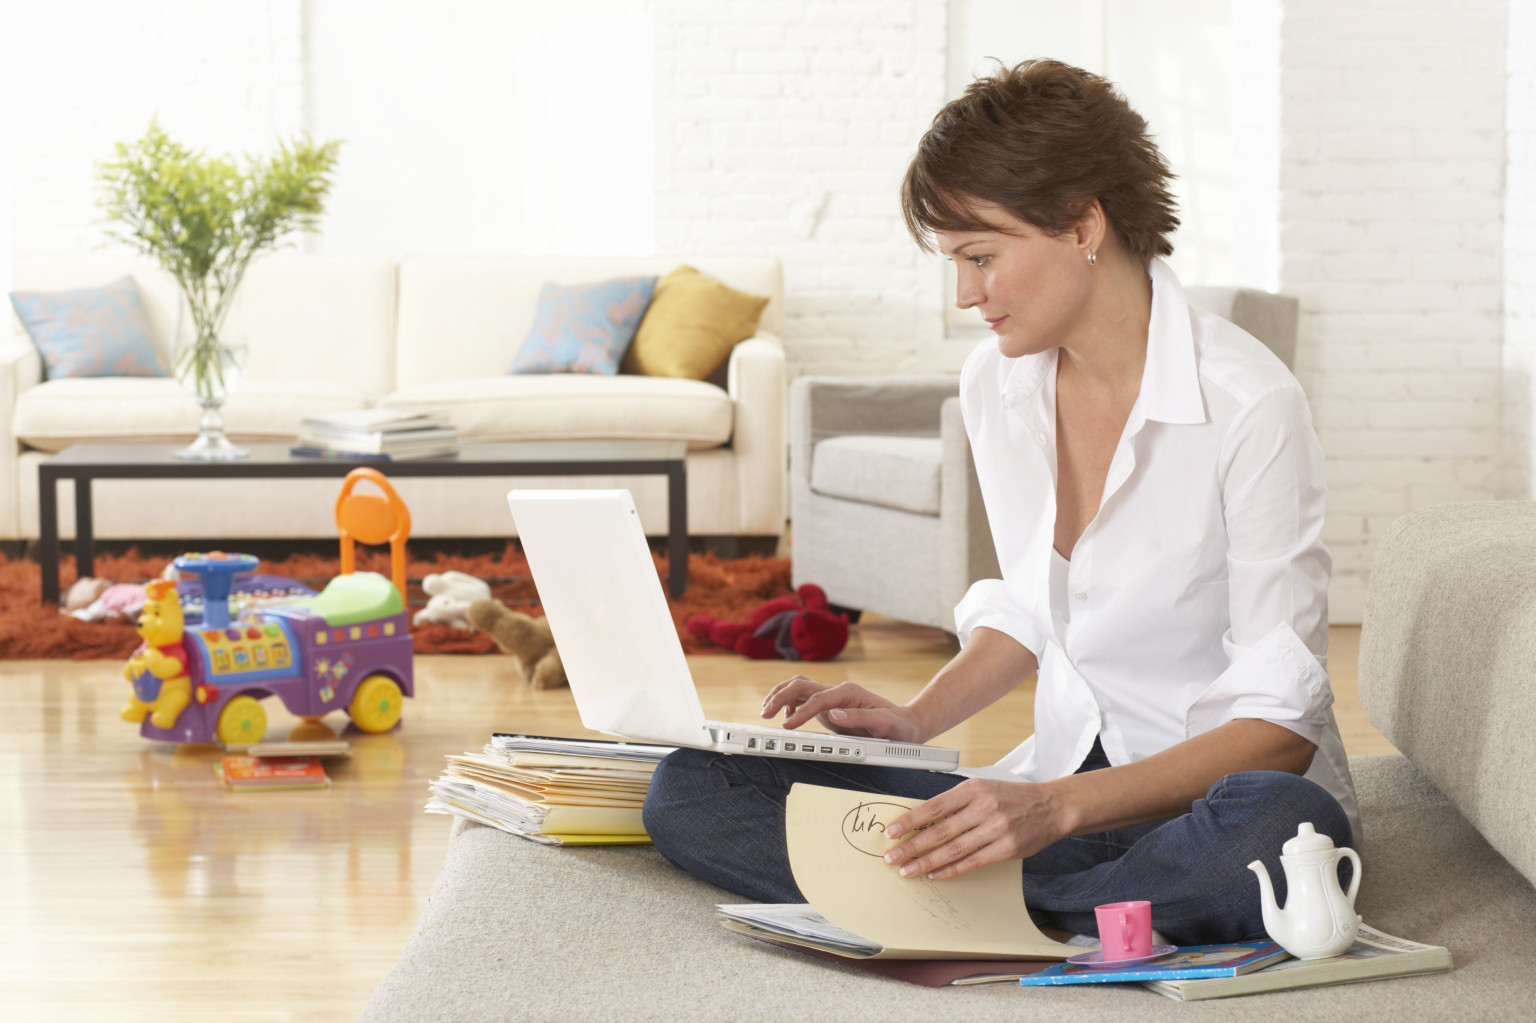 3 Ways to Be More Productive While Working from Home